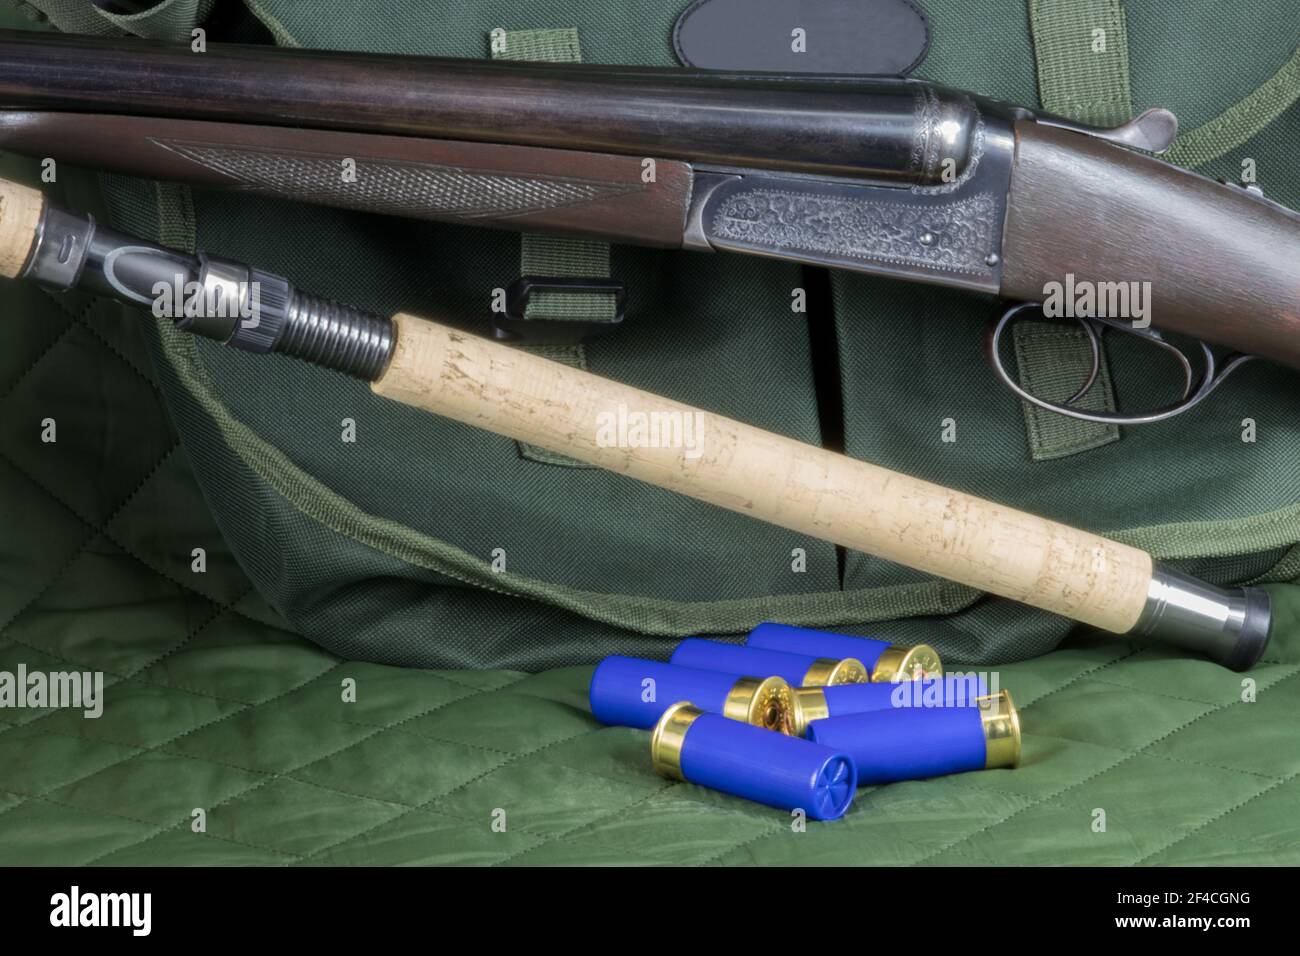 Shotgun with fishing rod and cartridges with a game bag on a green outdoor  coat Stock Photo - Alamy